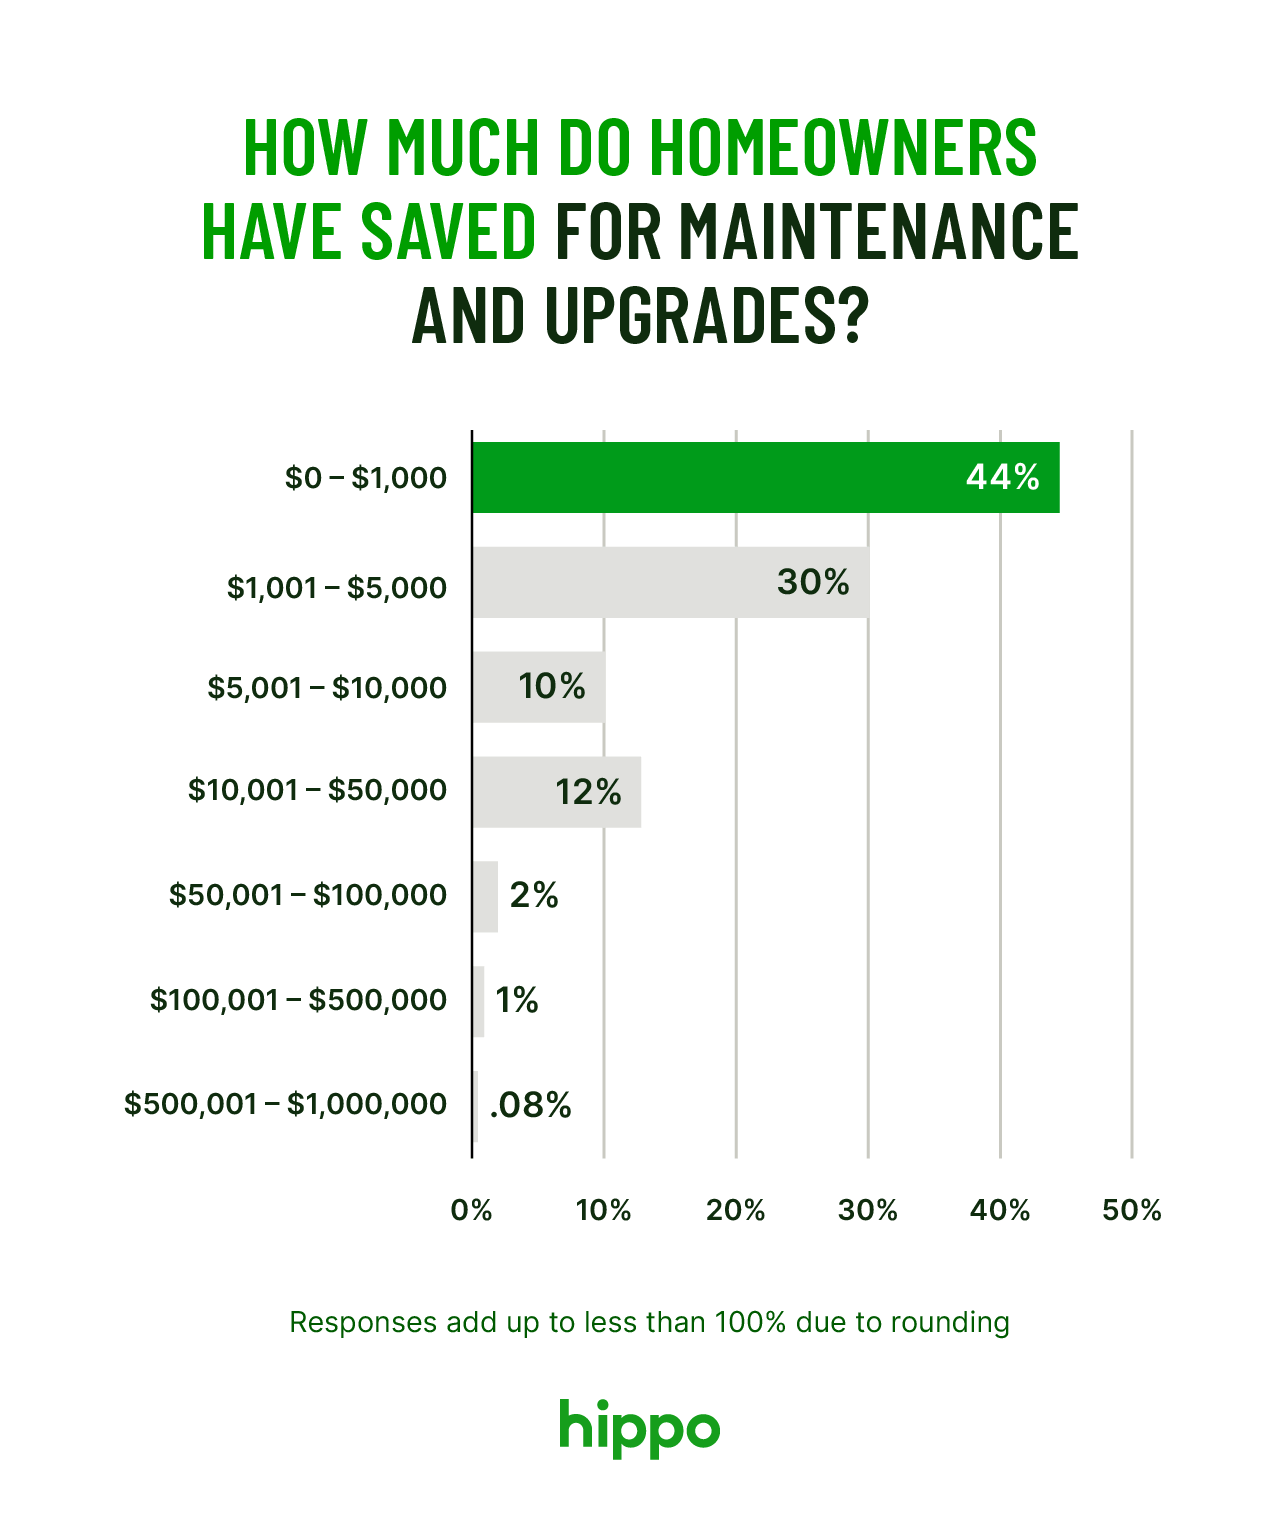 horizontal bar chart showing how much homeowners saved for maintenance and upgrades